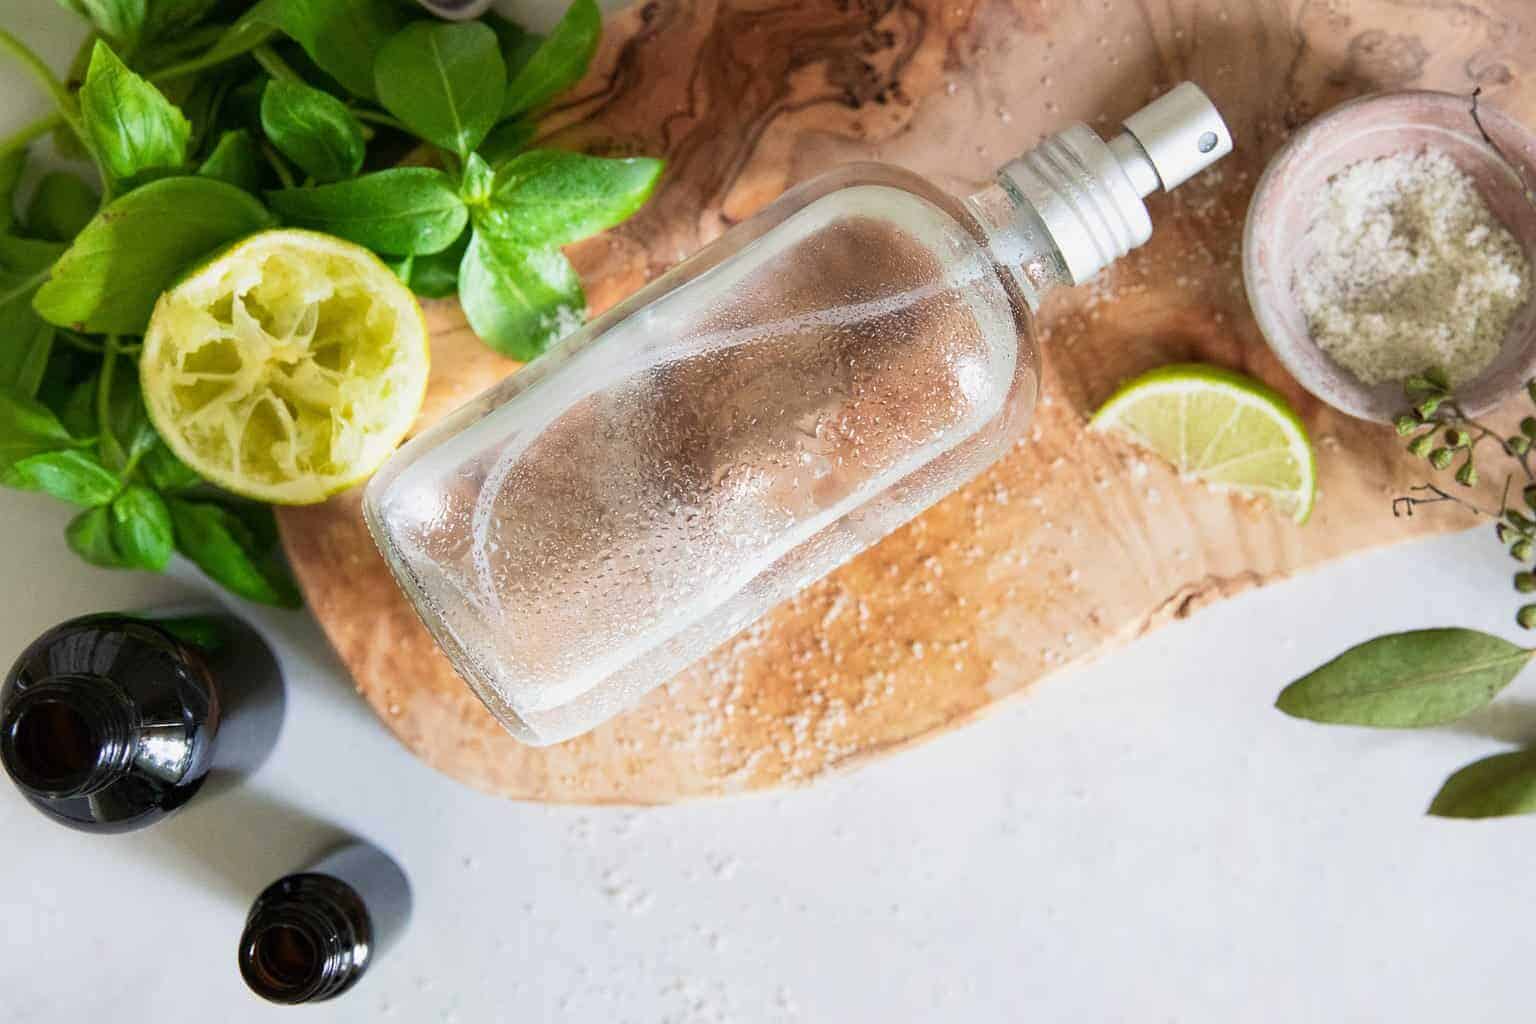 Summer Body Spray Recipe with Essential Oils and Everclear Grain Alcohol